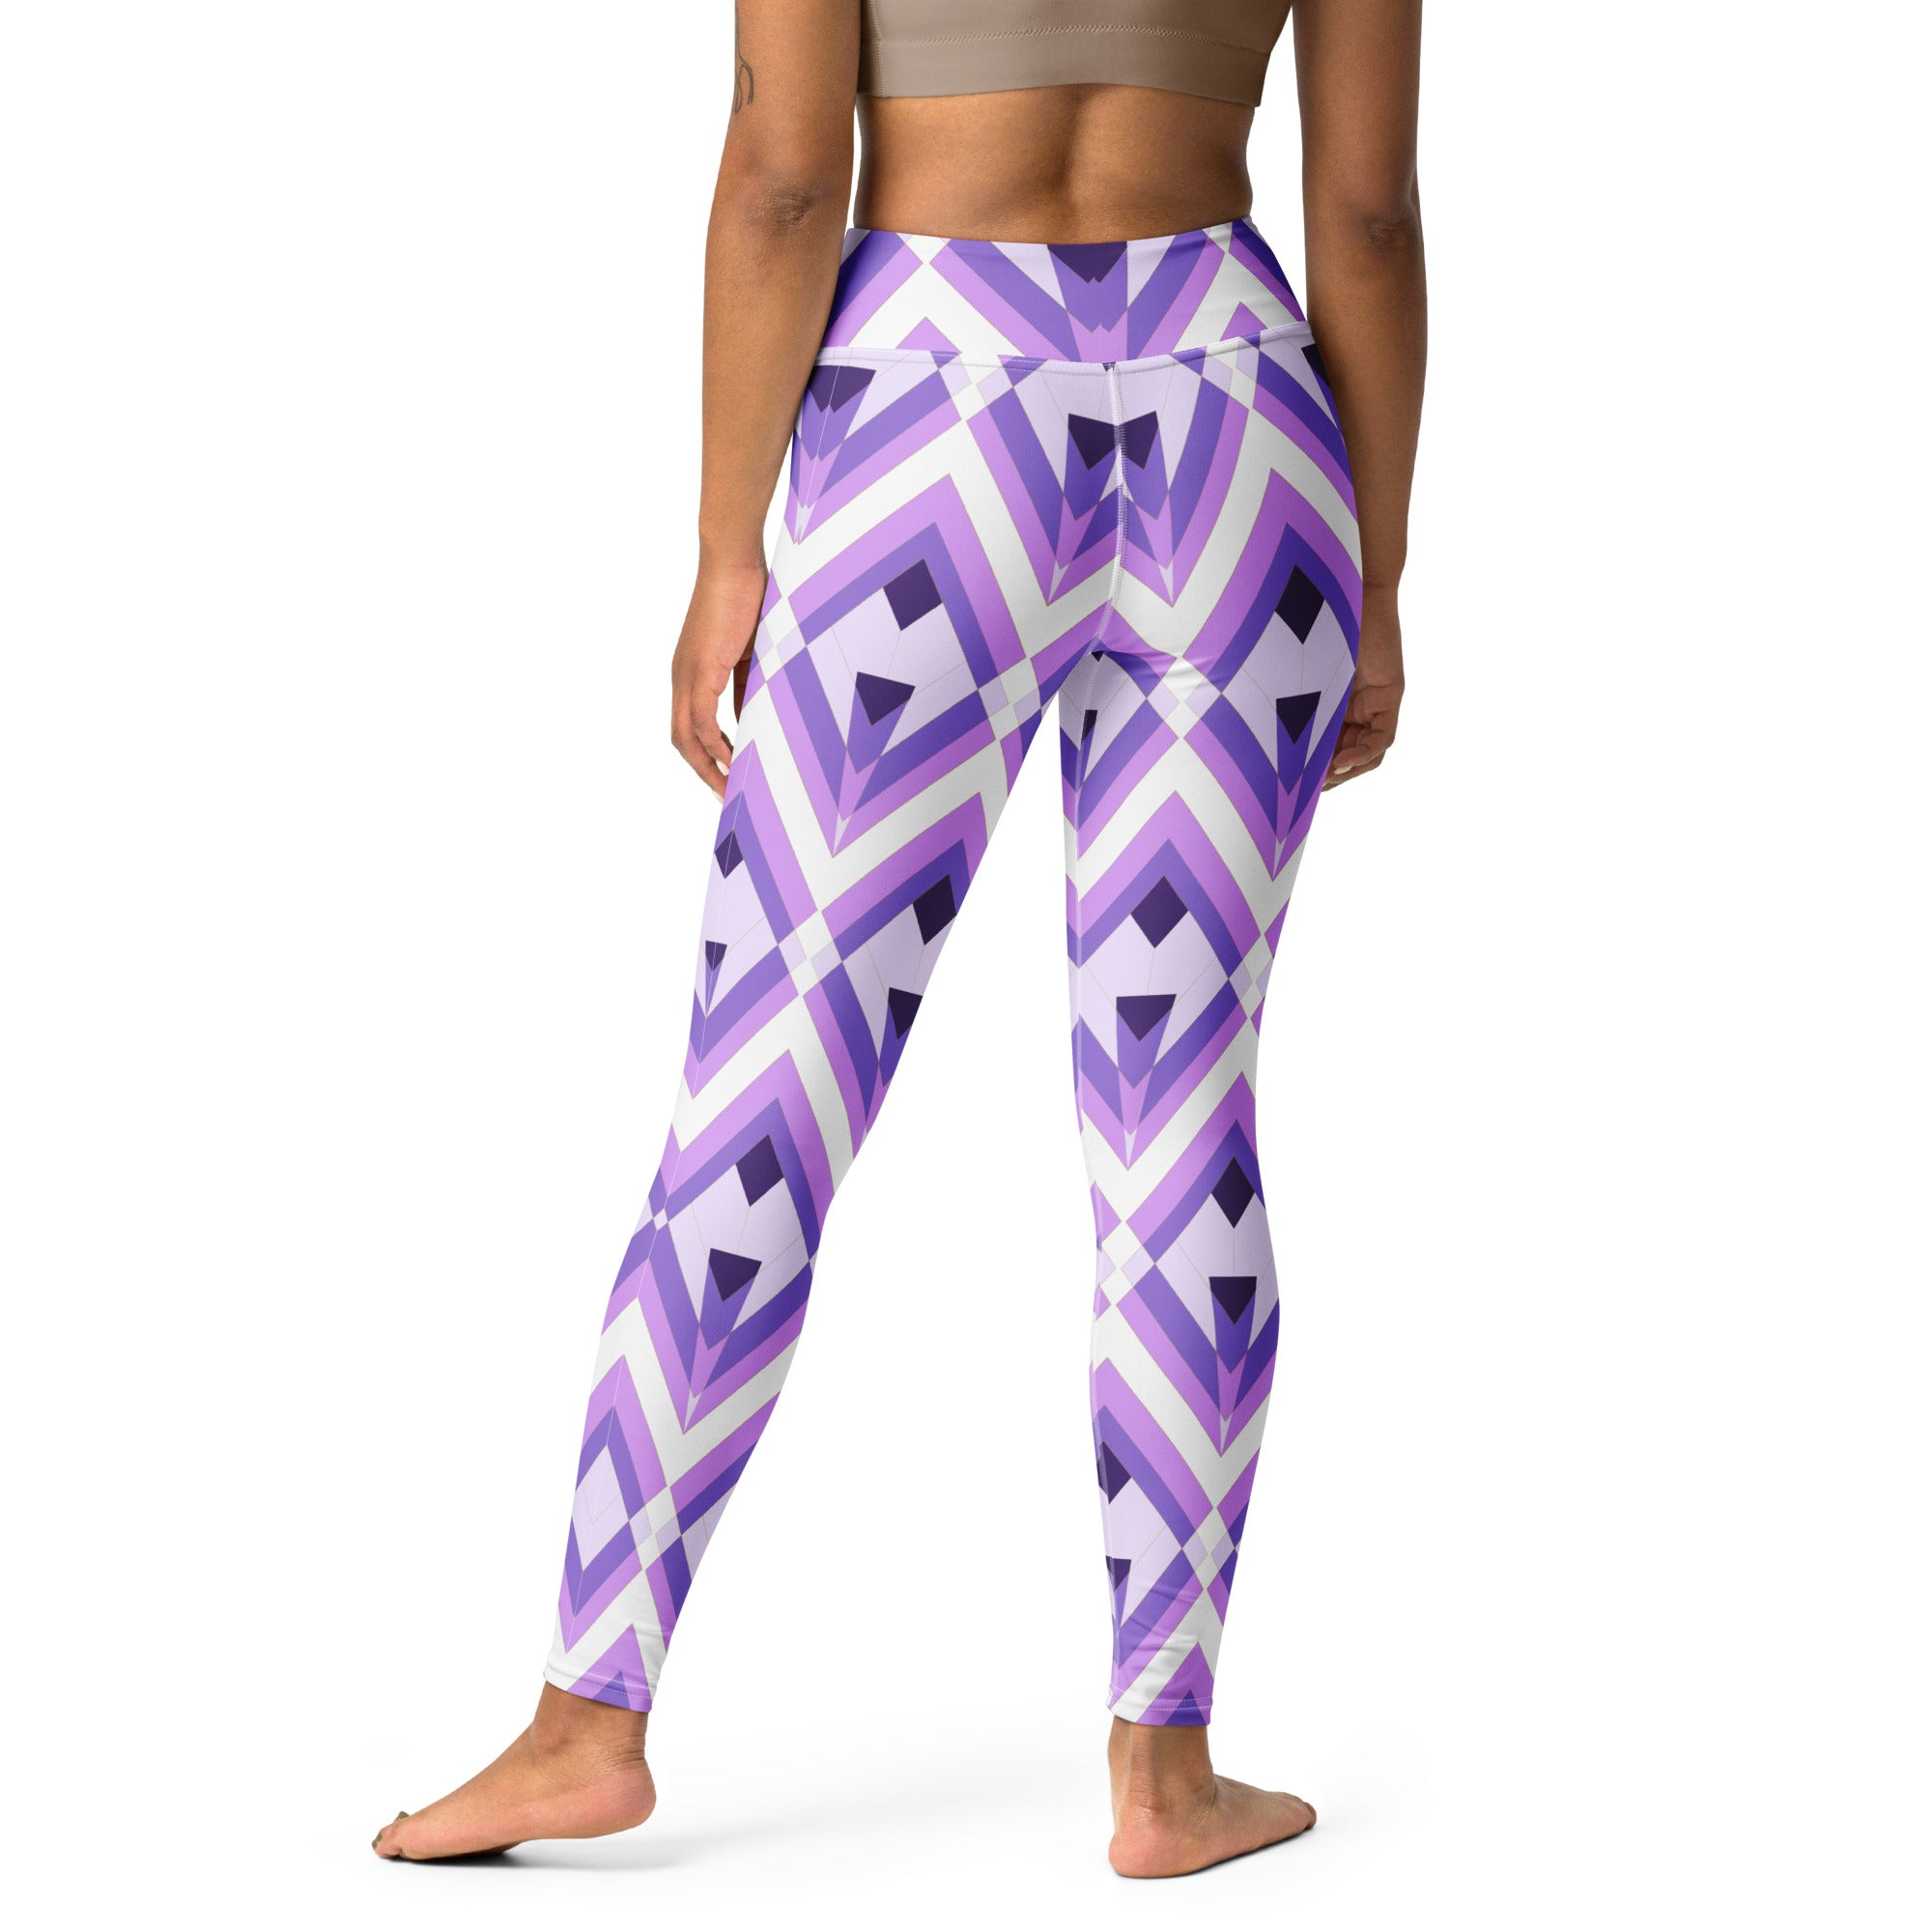 Elegance Flow Yoga Leggings styled with a fitness outfit.